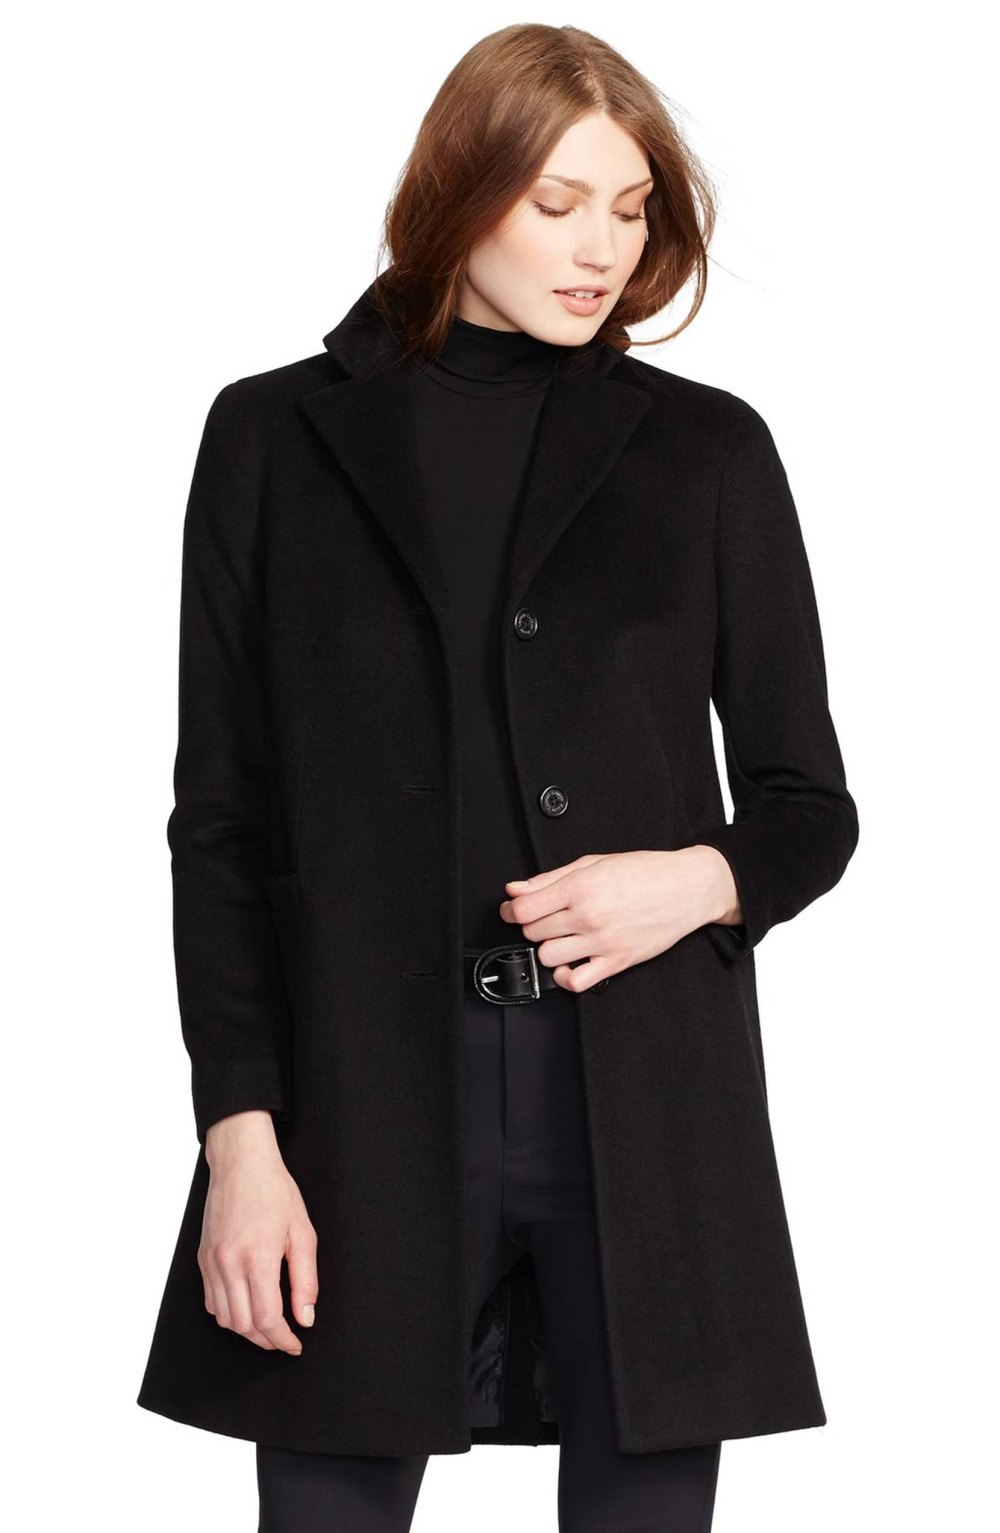 Winter Fashion: Stay Stylishly Warm in This Ralph Lauren Coat | Us Weekly